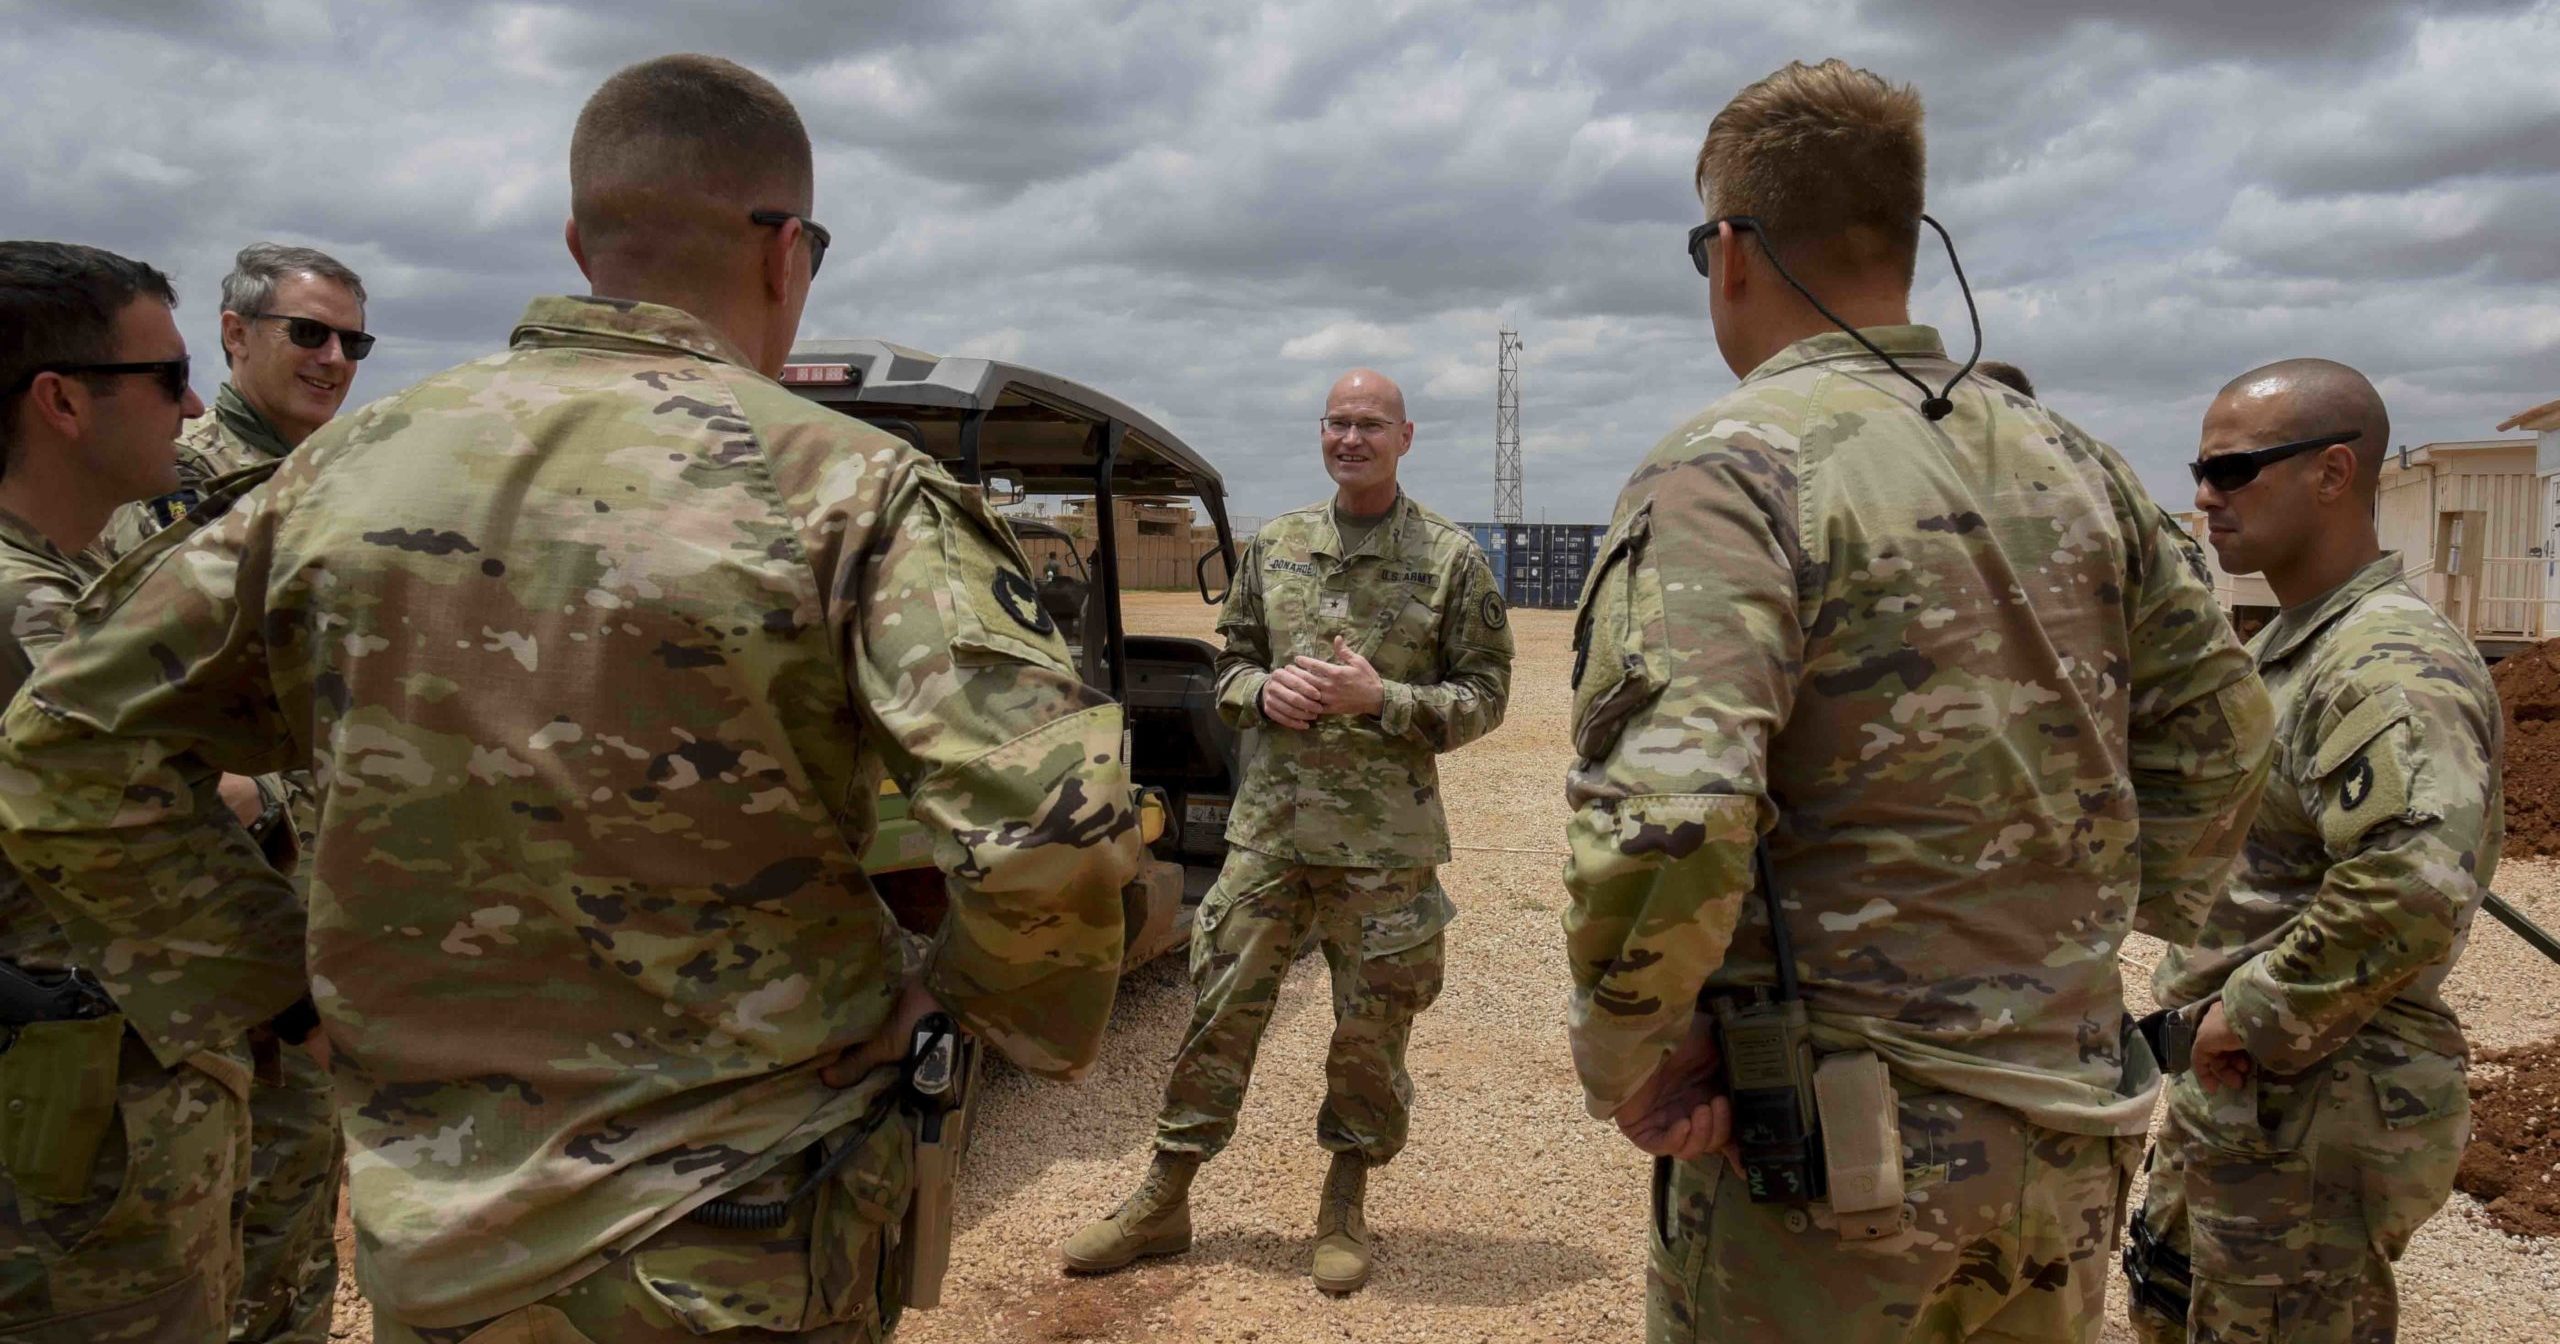 U.S. Army Brig. Gen. Damian T. Donahoe, center, talks with service members on Sept. 5, 2020, in Somalia.